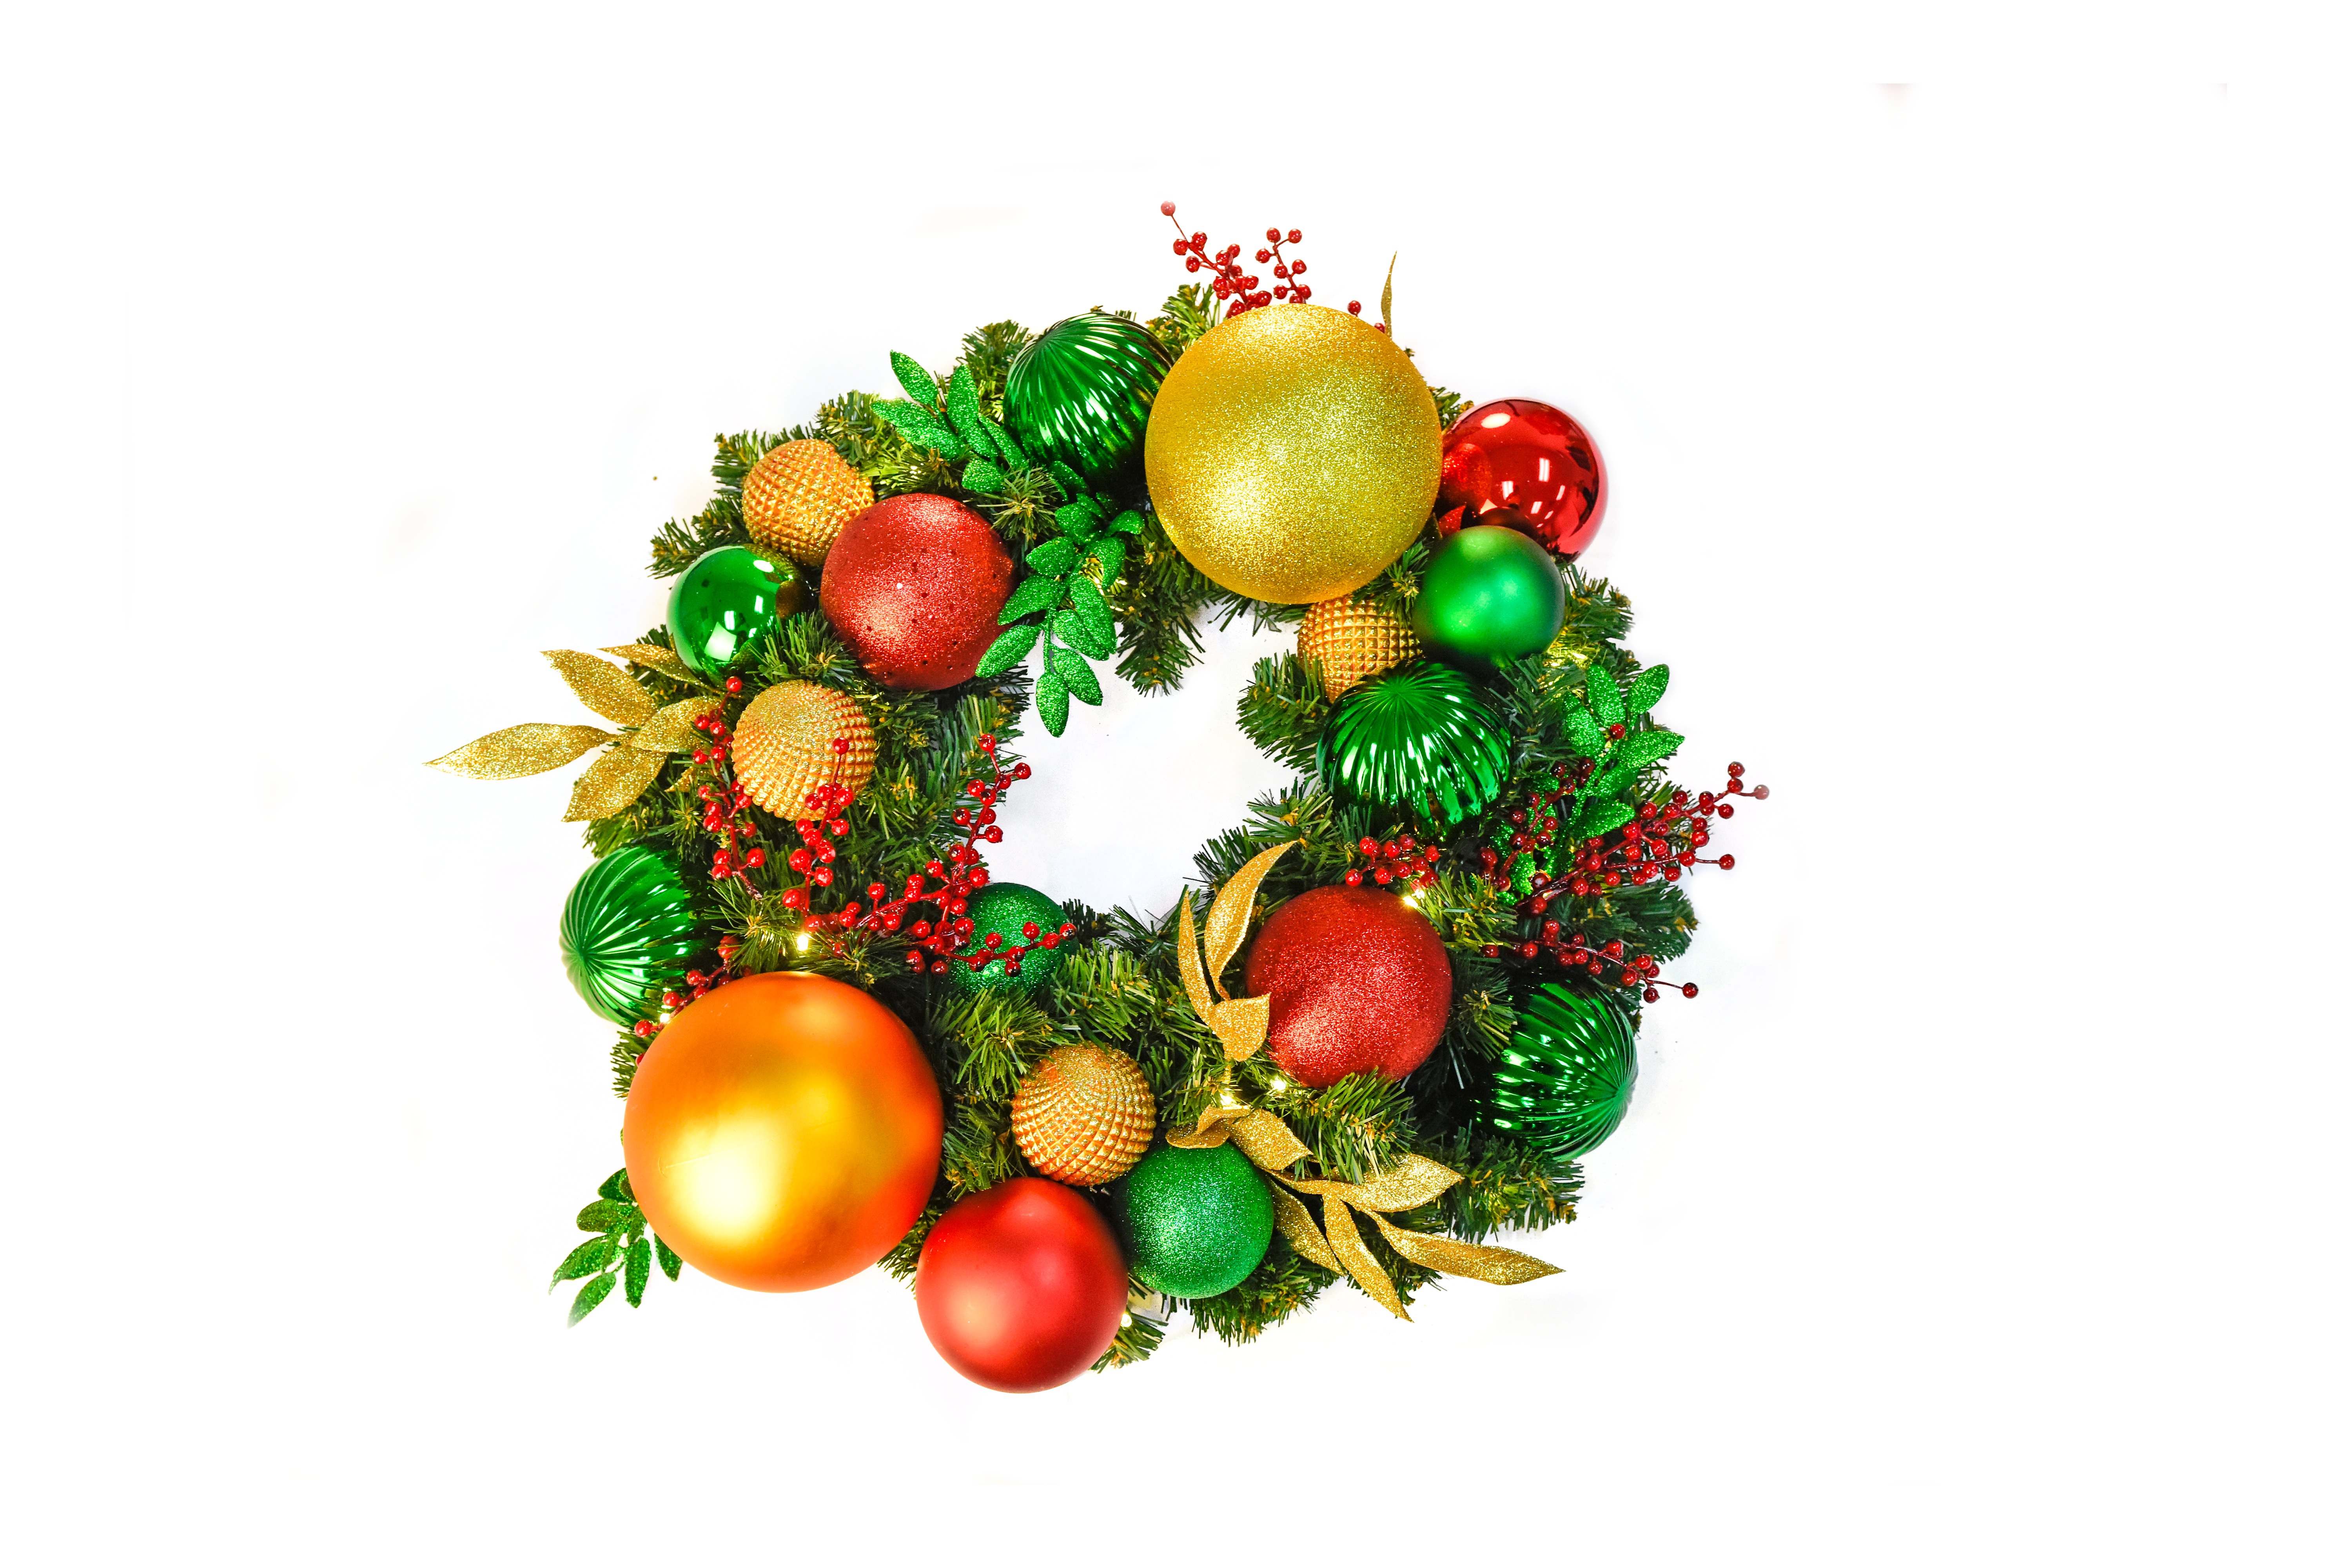 Gold, green, & red pre-decorated Christmas wreath